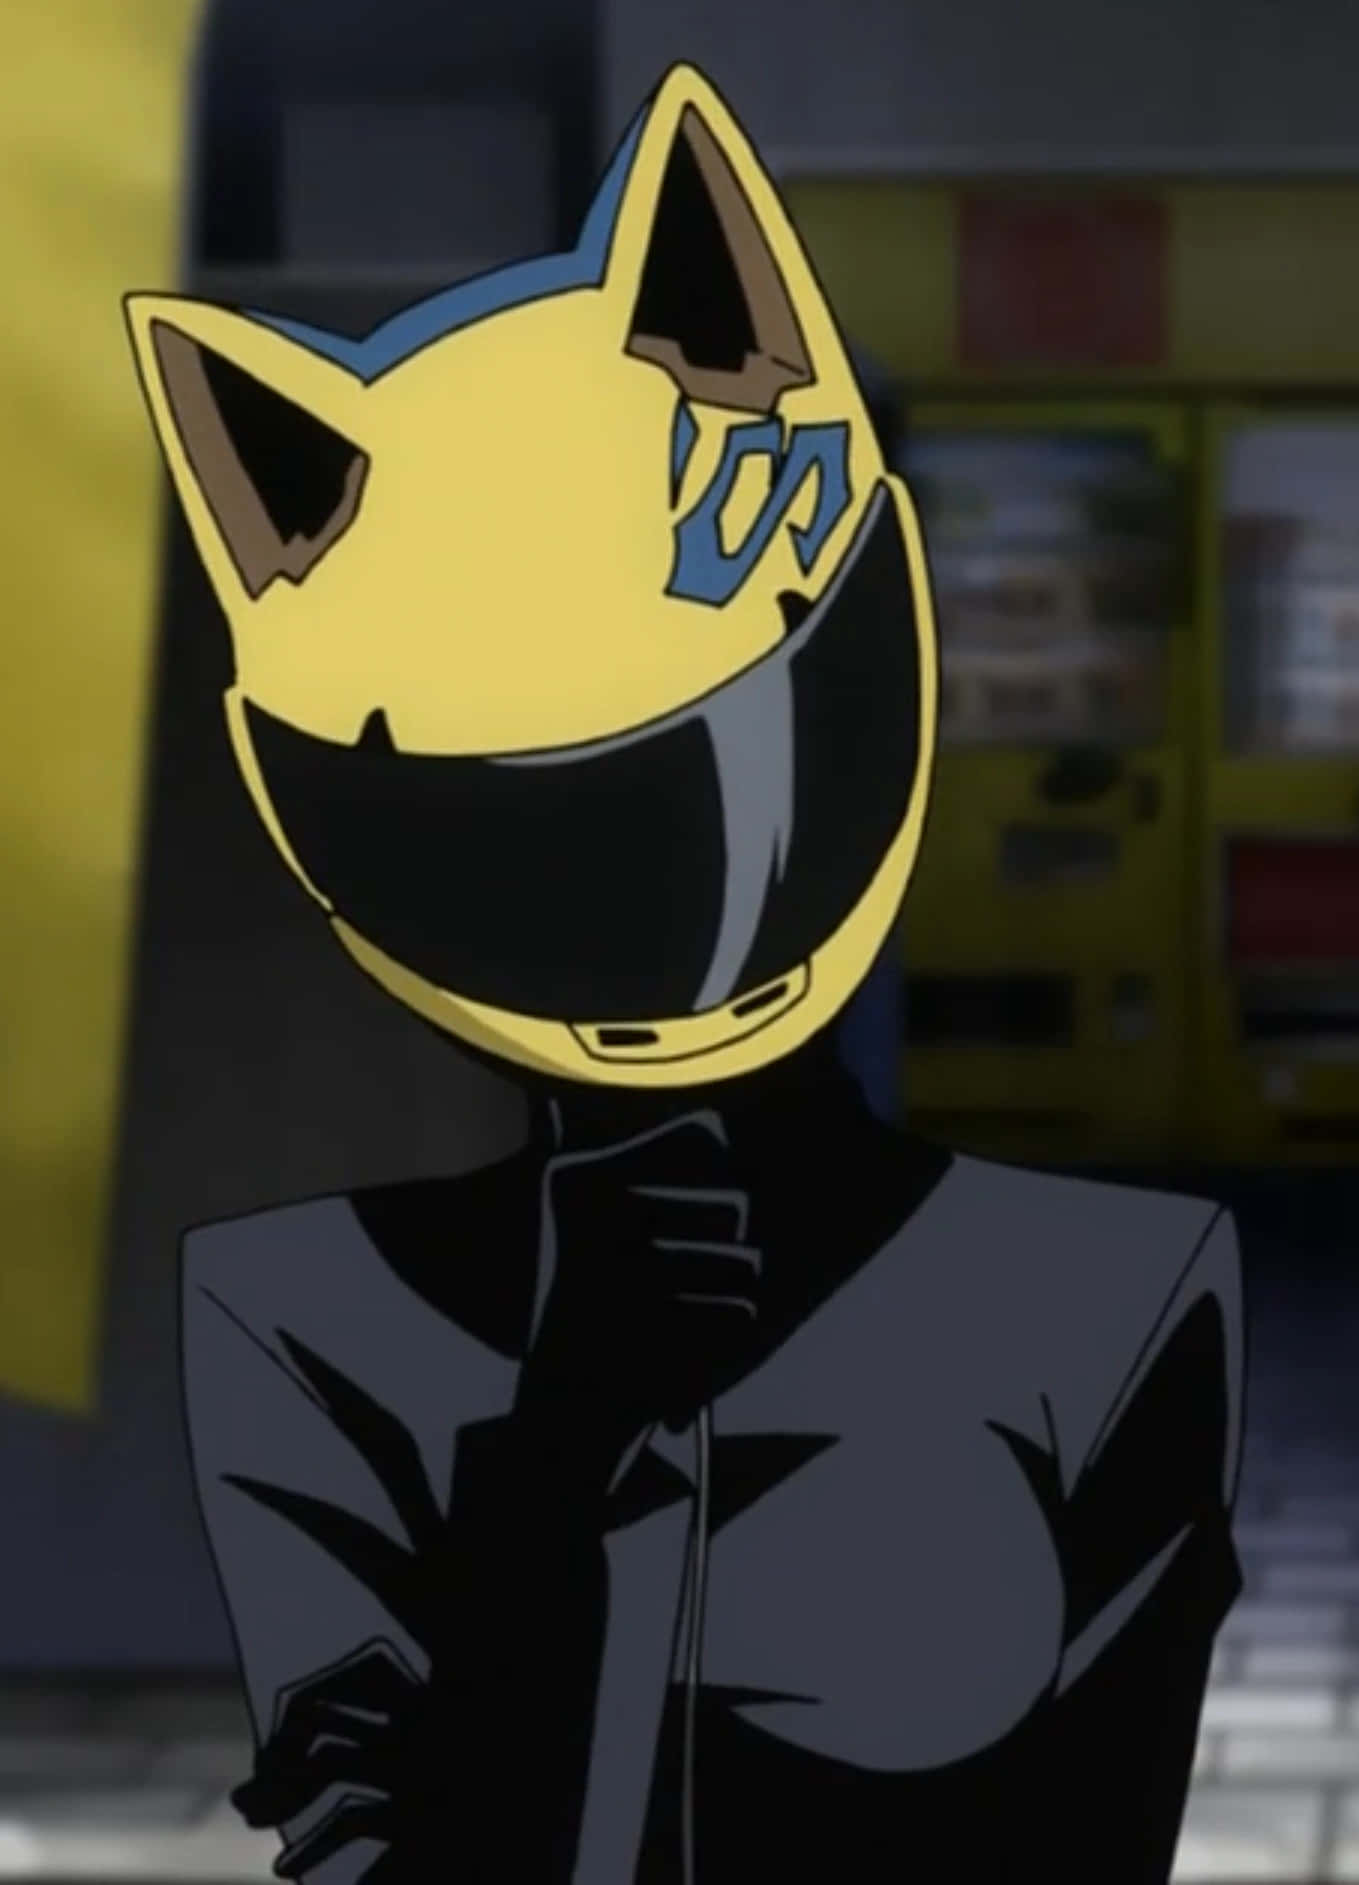 Celty Sturluson Riding Her Motorcycle in the City Wallpaper